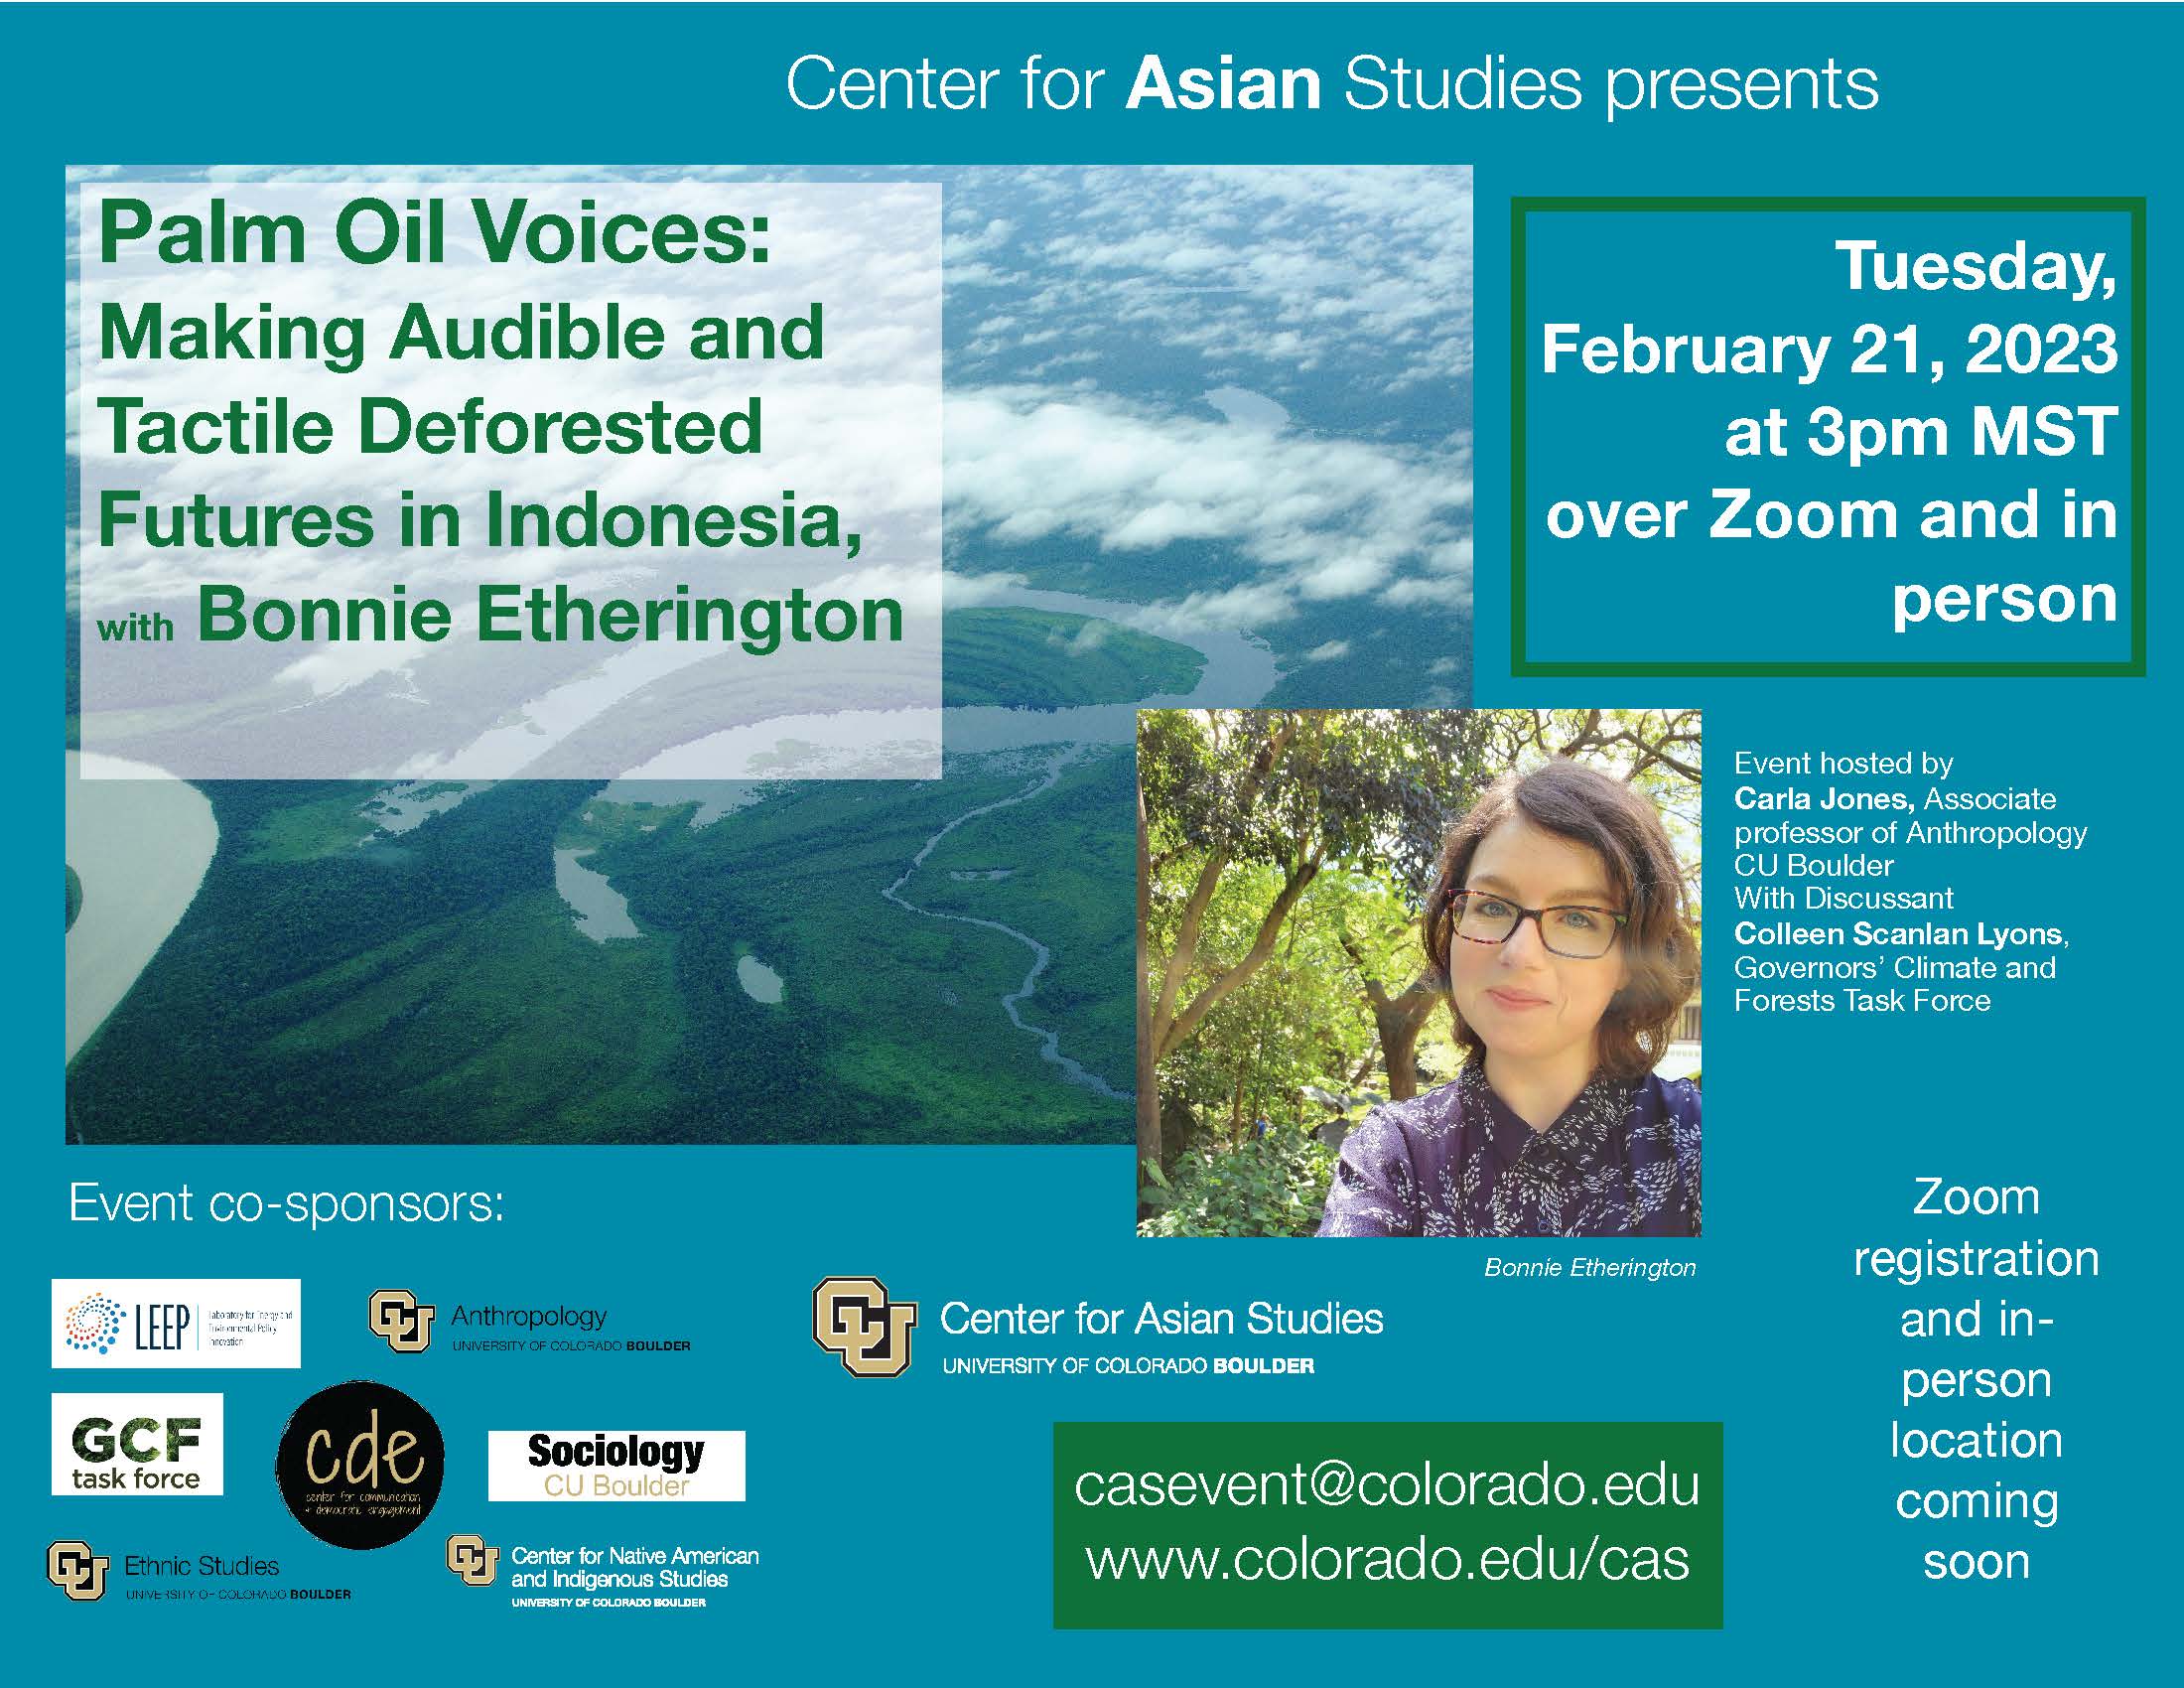 A flyer advertising the event Palm Oil Voices, co-sponsored with the Center for Asian Studies at University of Colorado Boulder